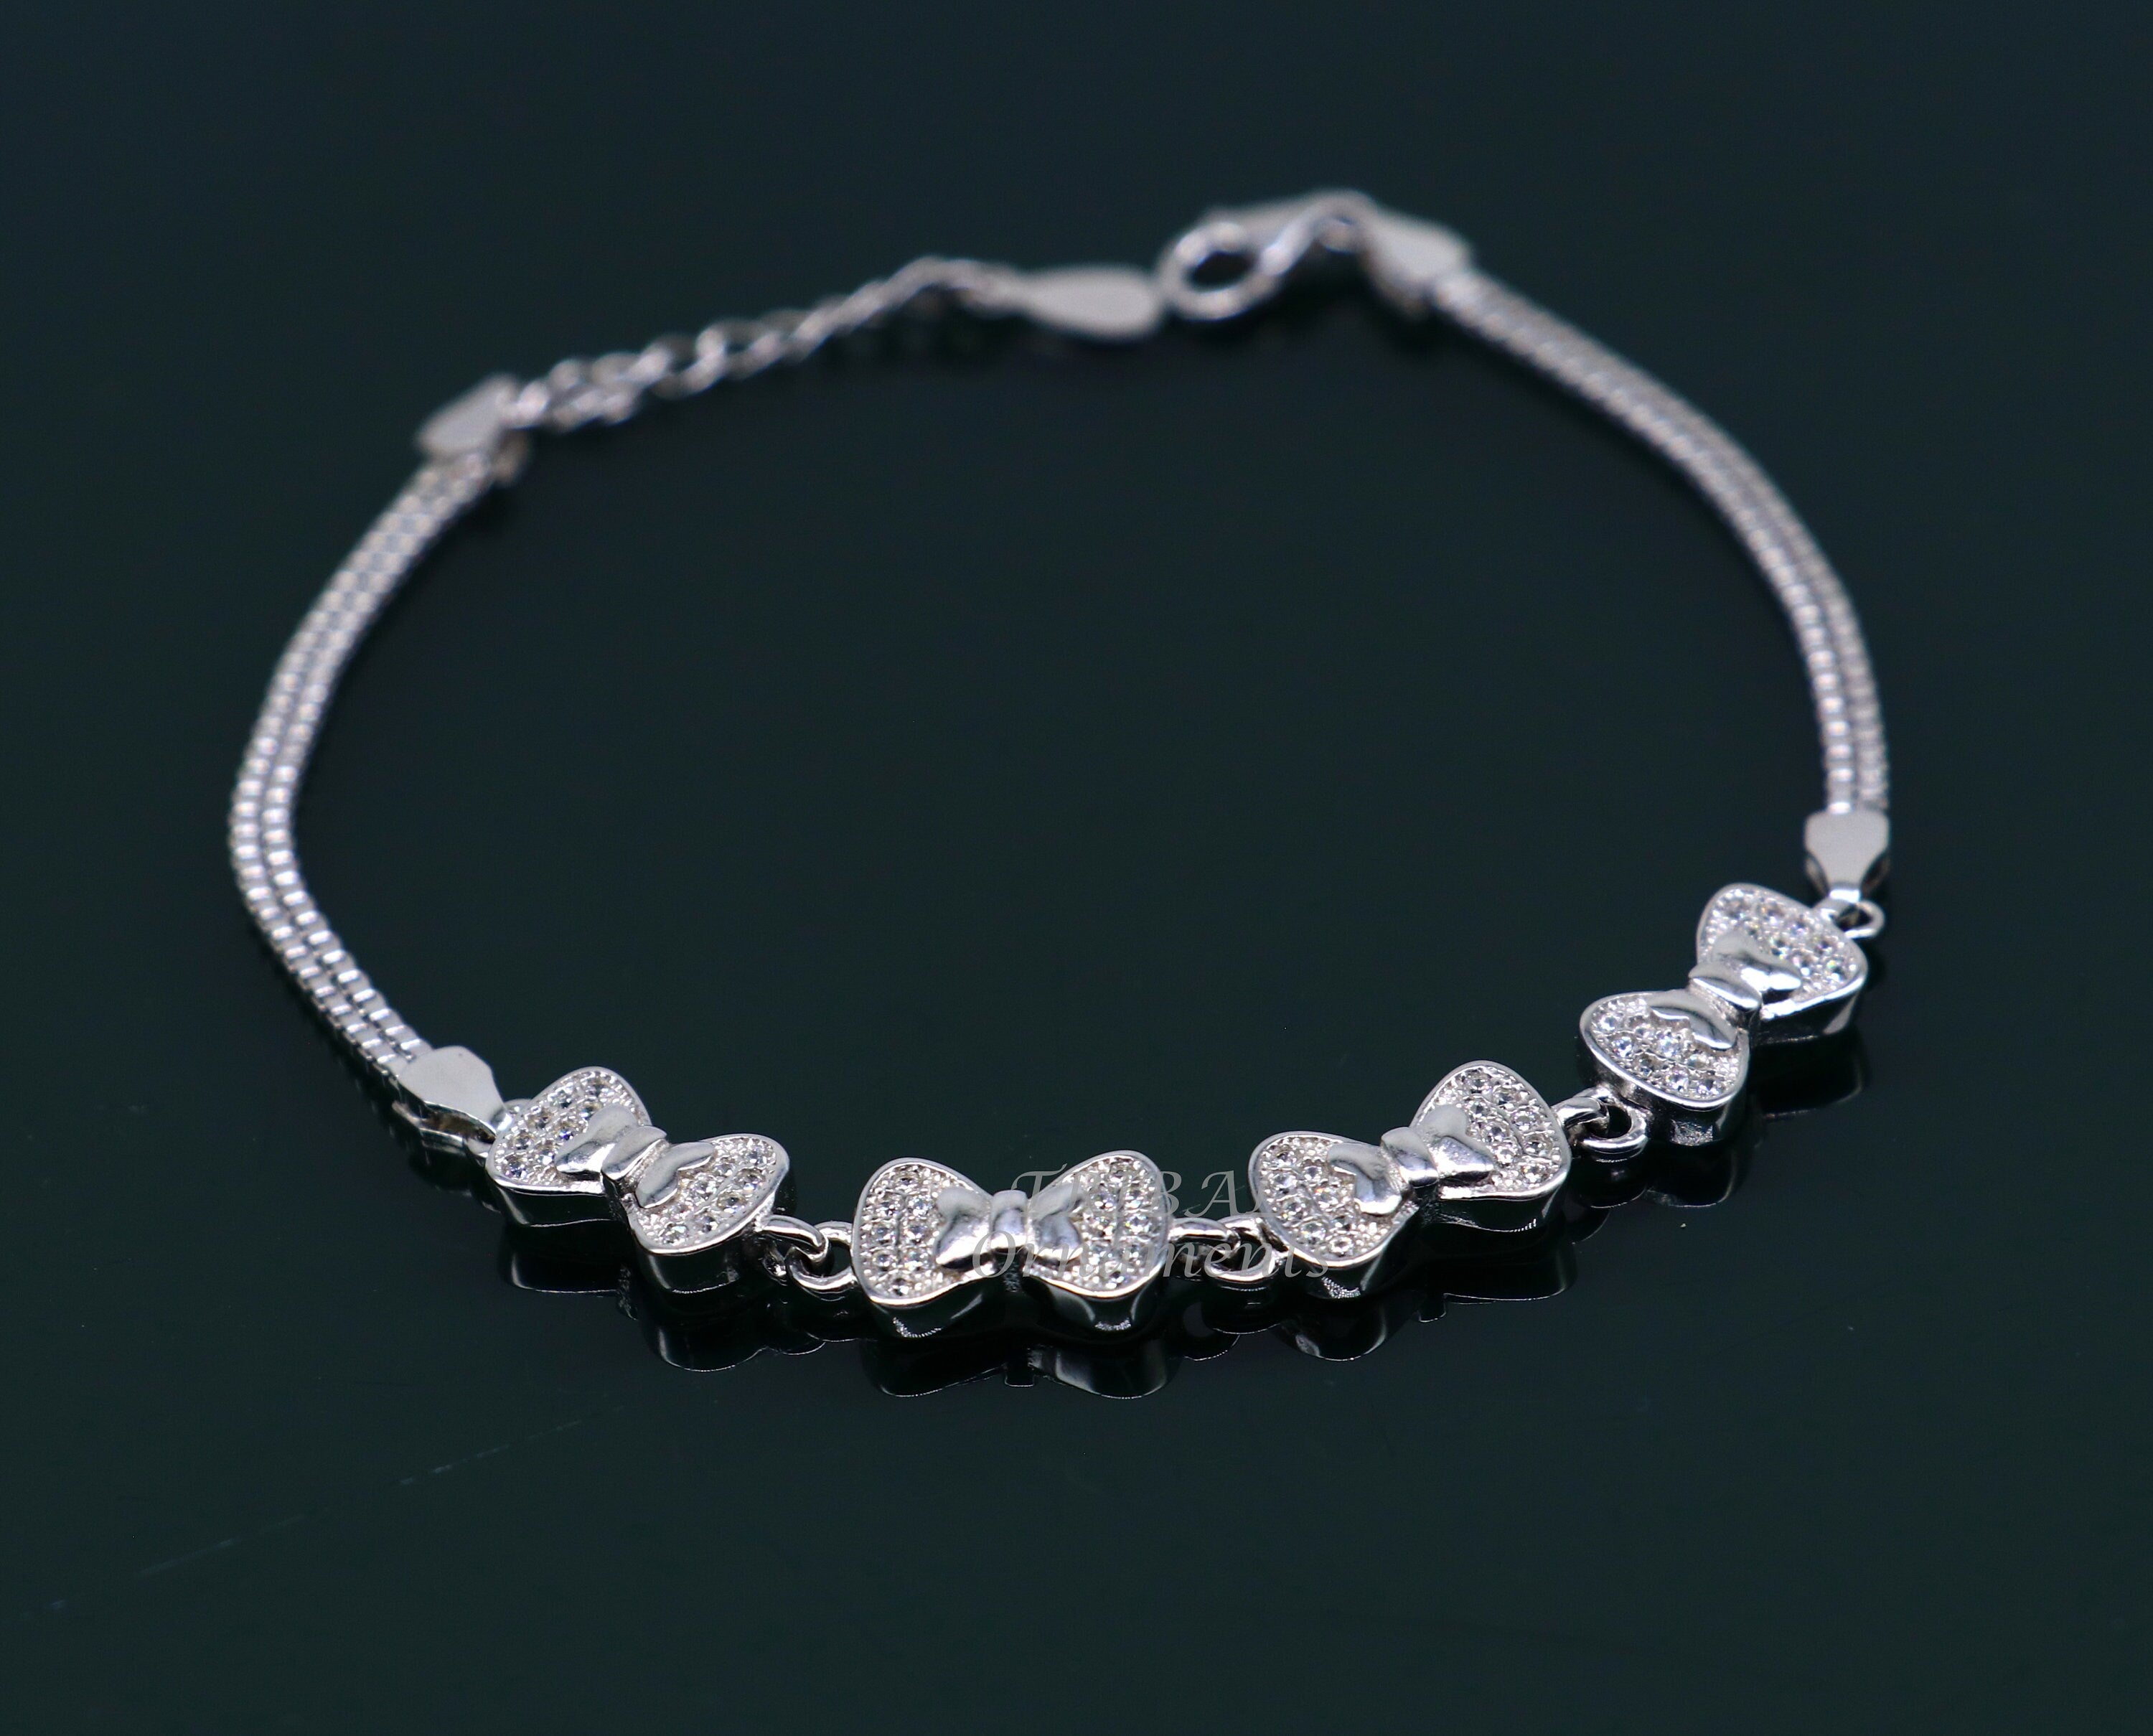 All Over The Sky Star Silver Bracelets, 999 Silver Bracelet for Women -  China Sterling Silver Bracelet and Suitable for Gift Giving price |  Made-in-China.com